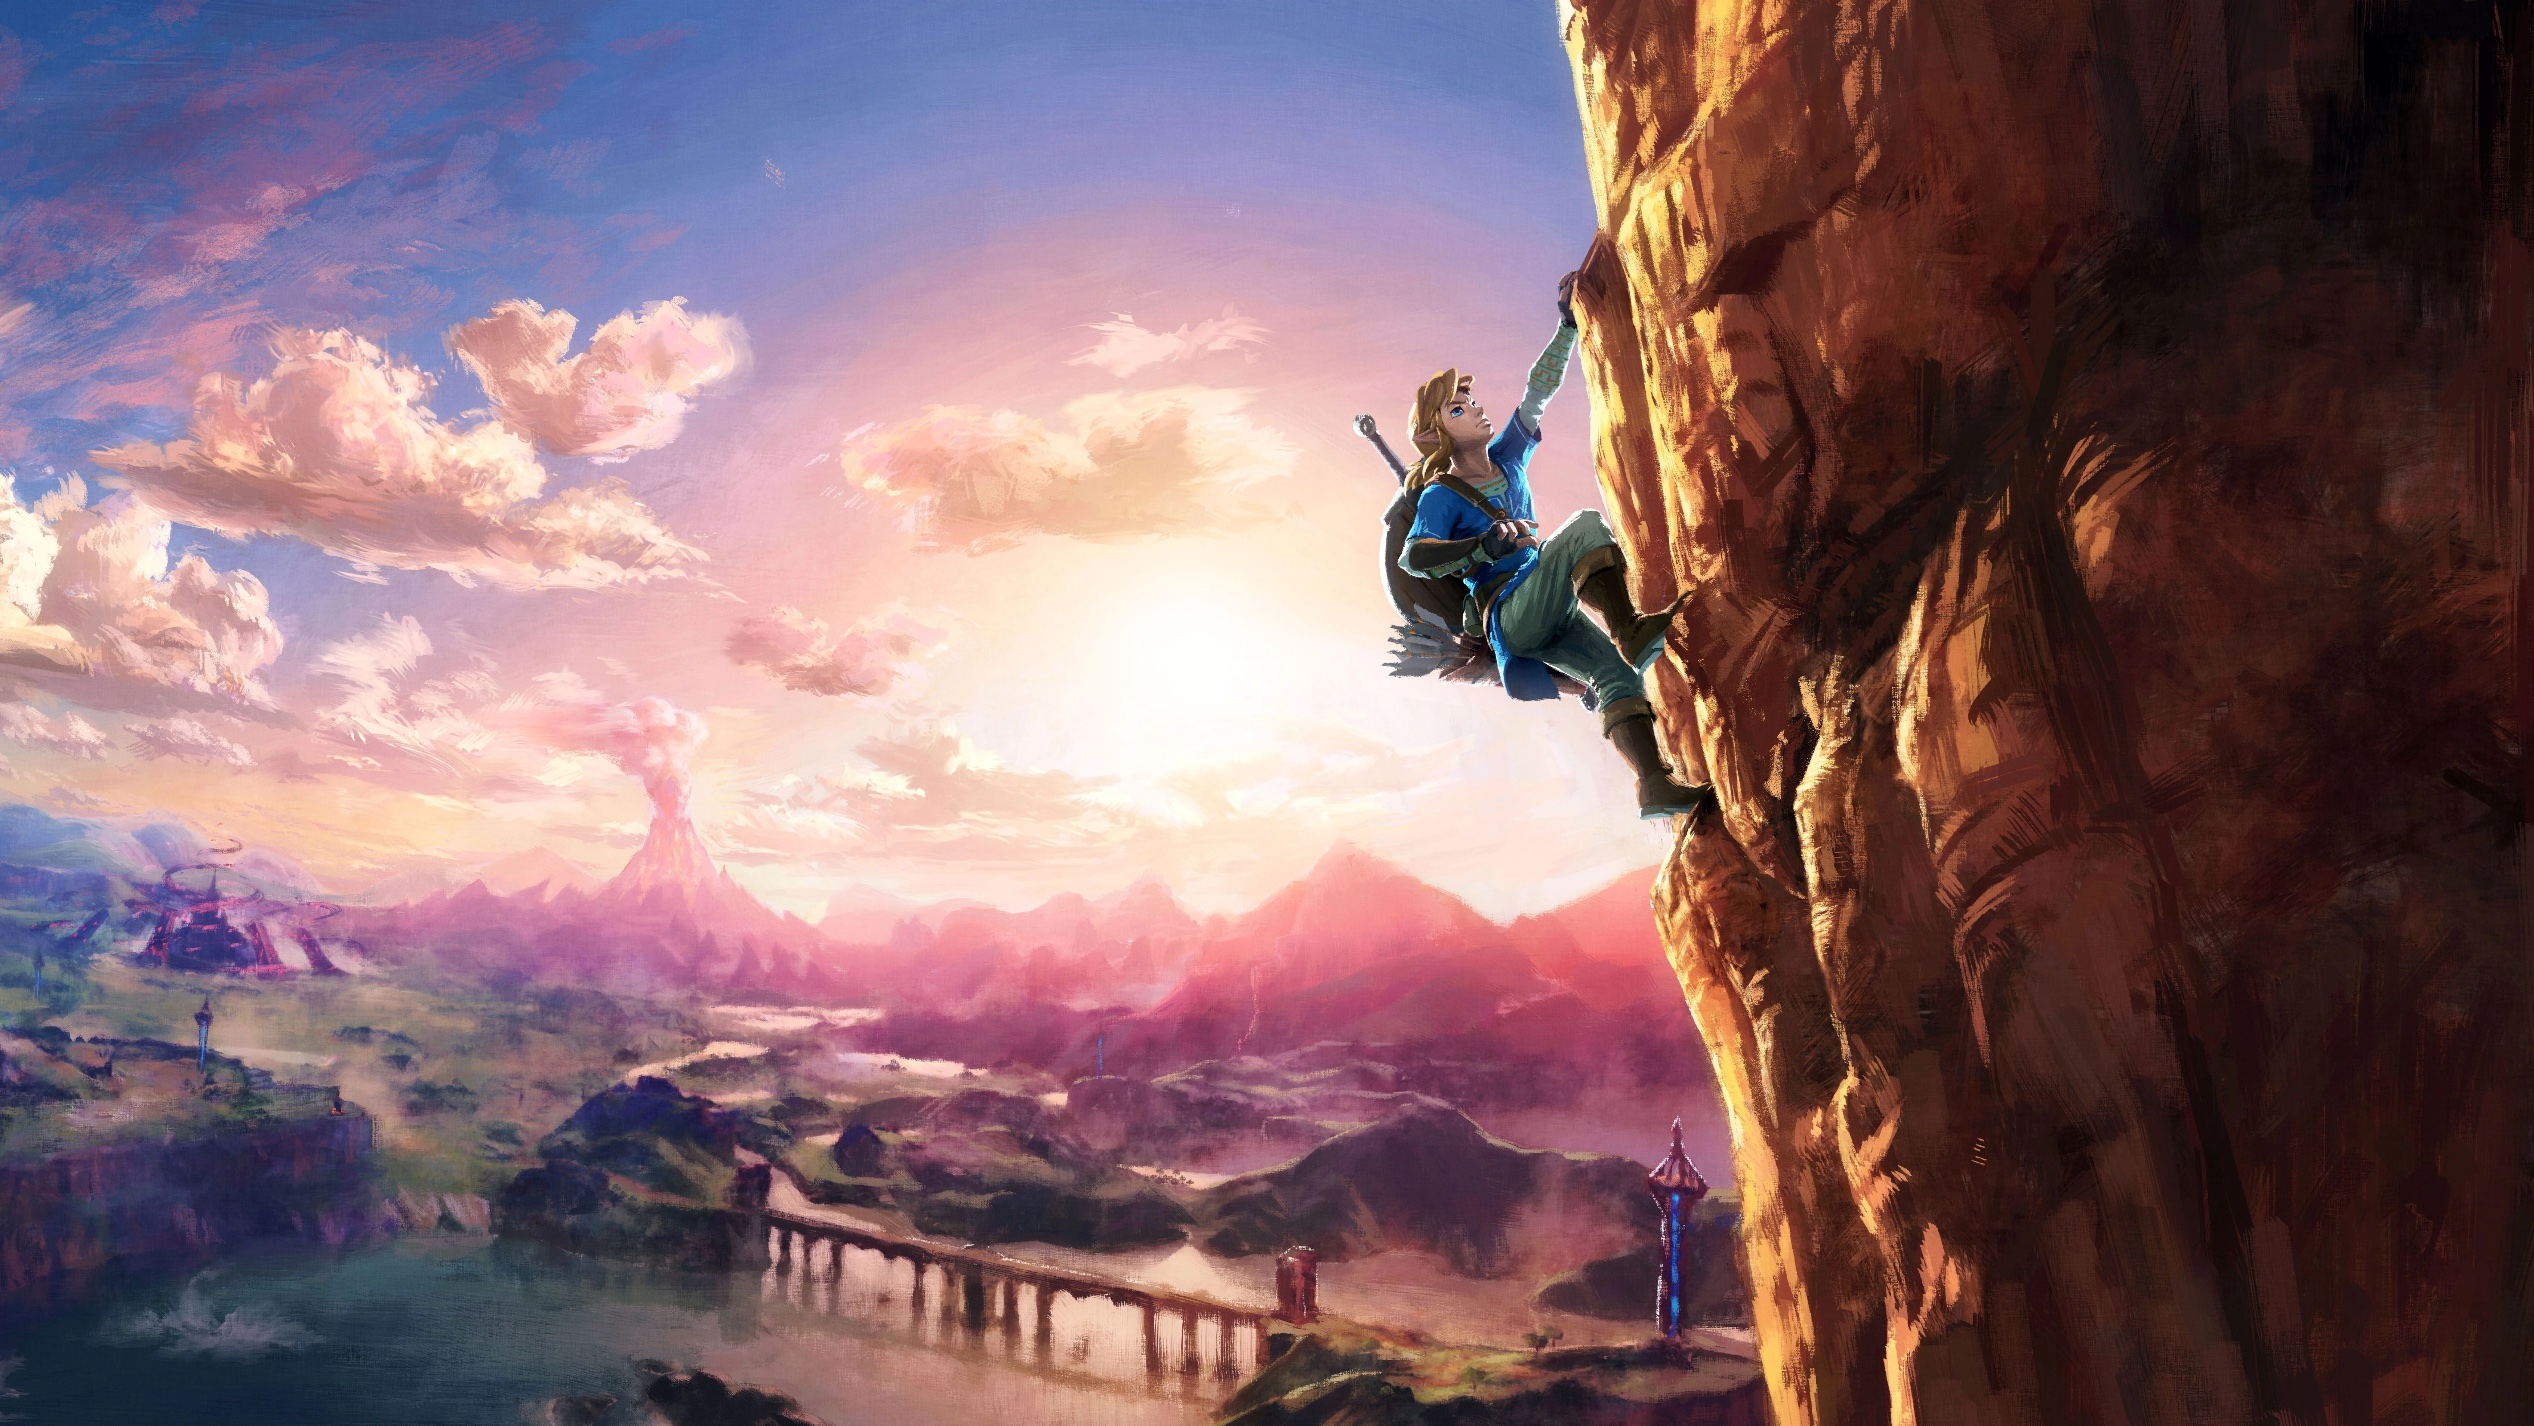 Breath of the Wild: A Look Back